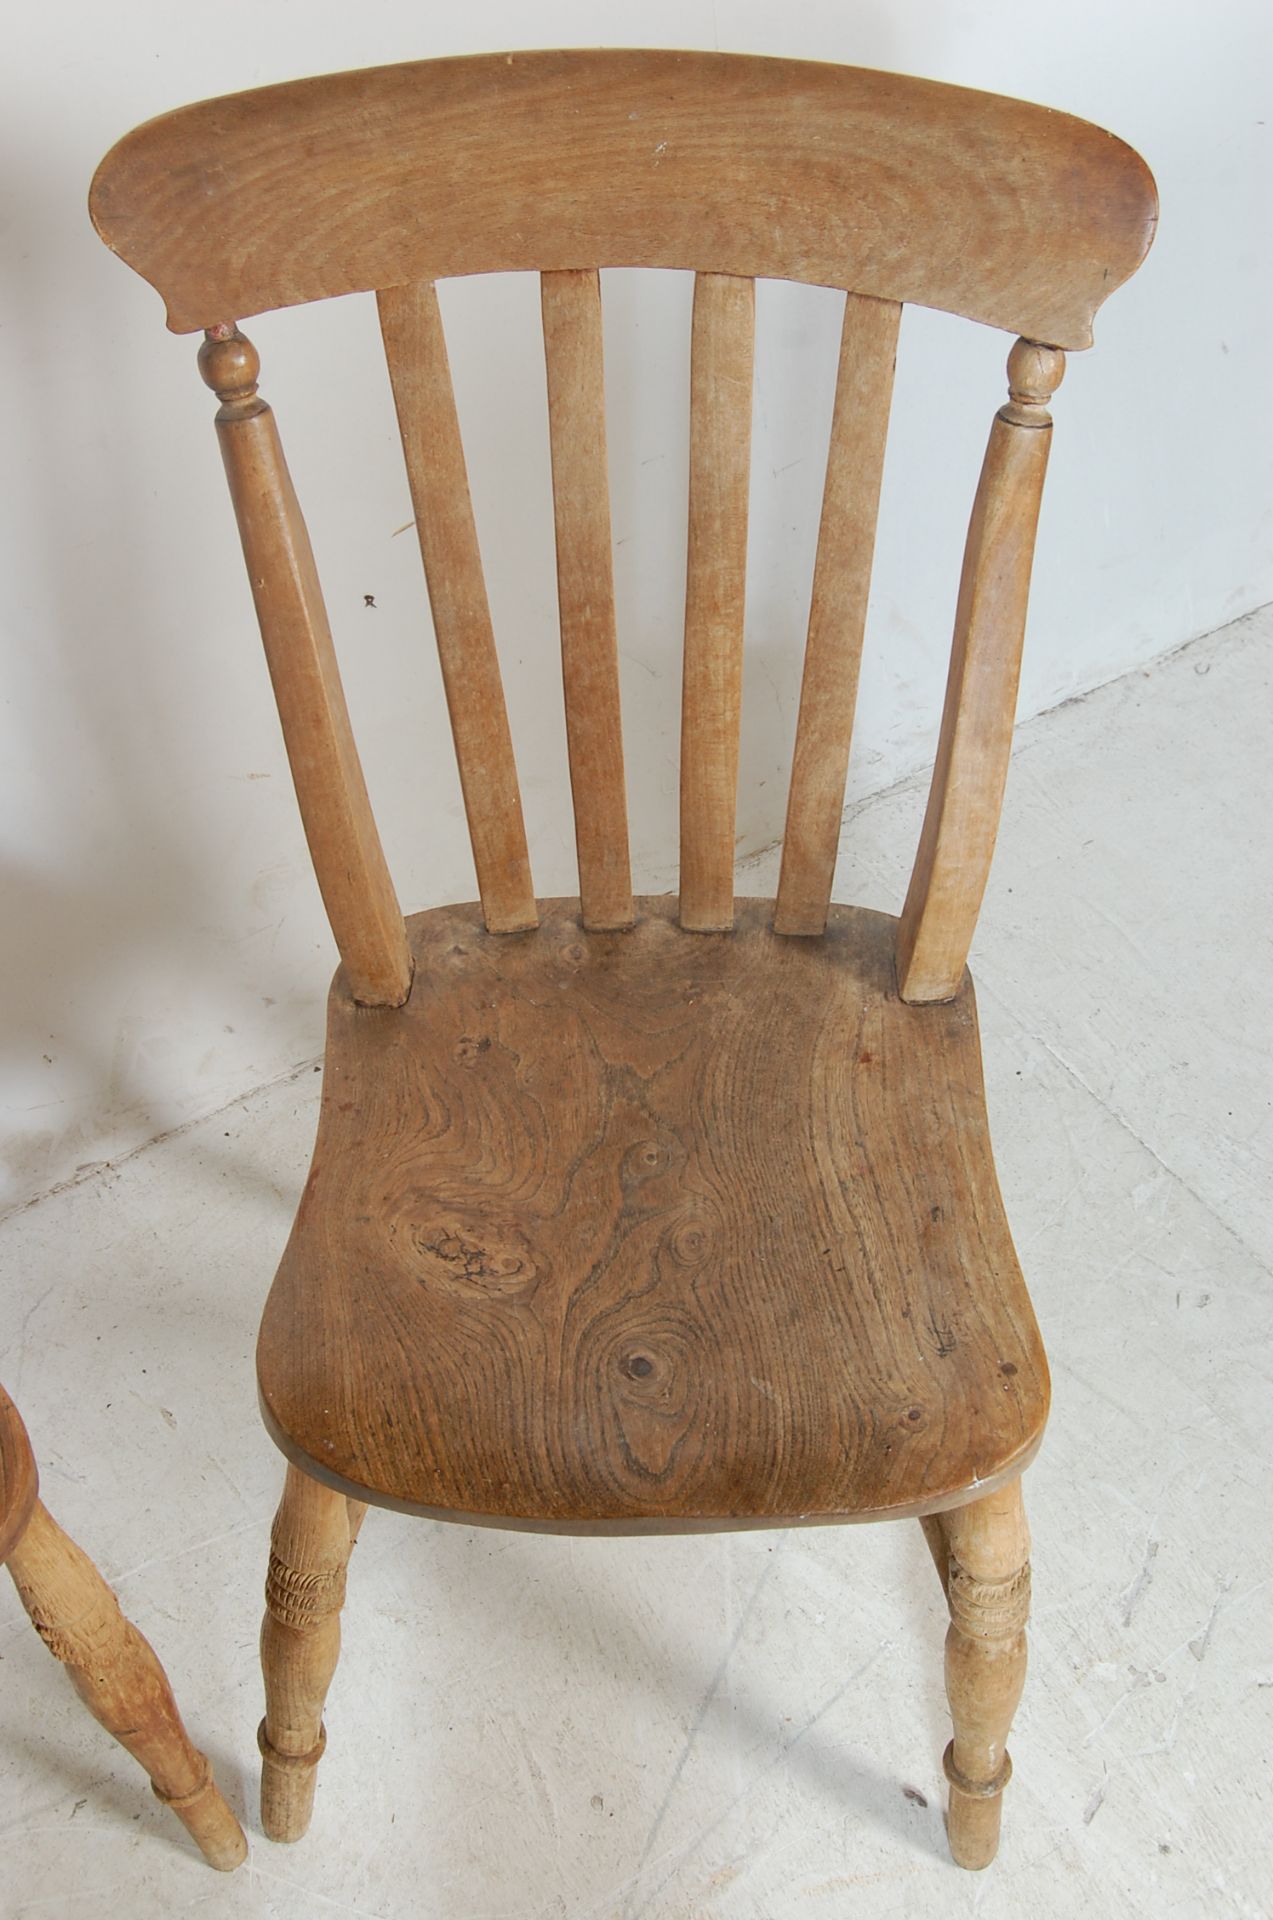 VICTORIAN 19TH CENTURY BEECH & ELM DINING CHAIRS - Image 5 of 7